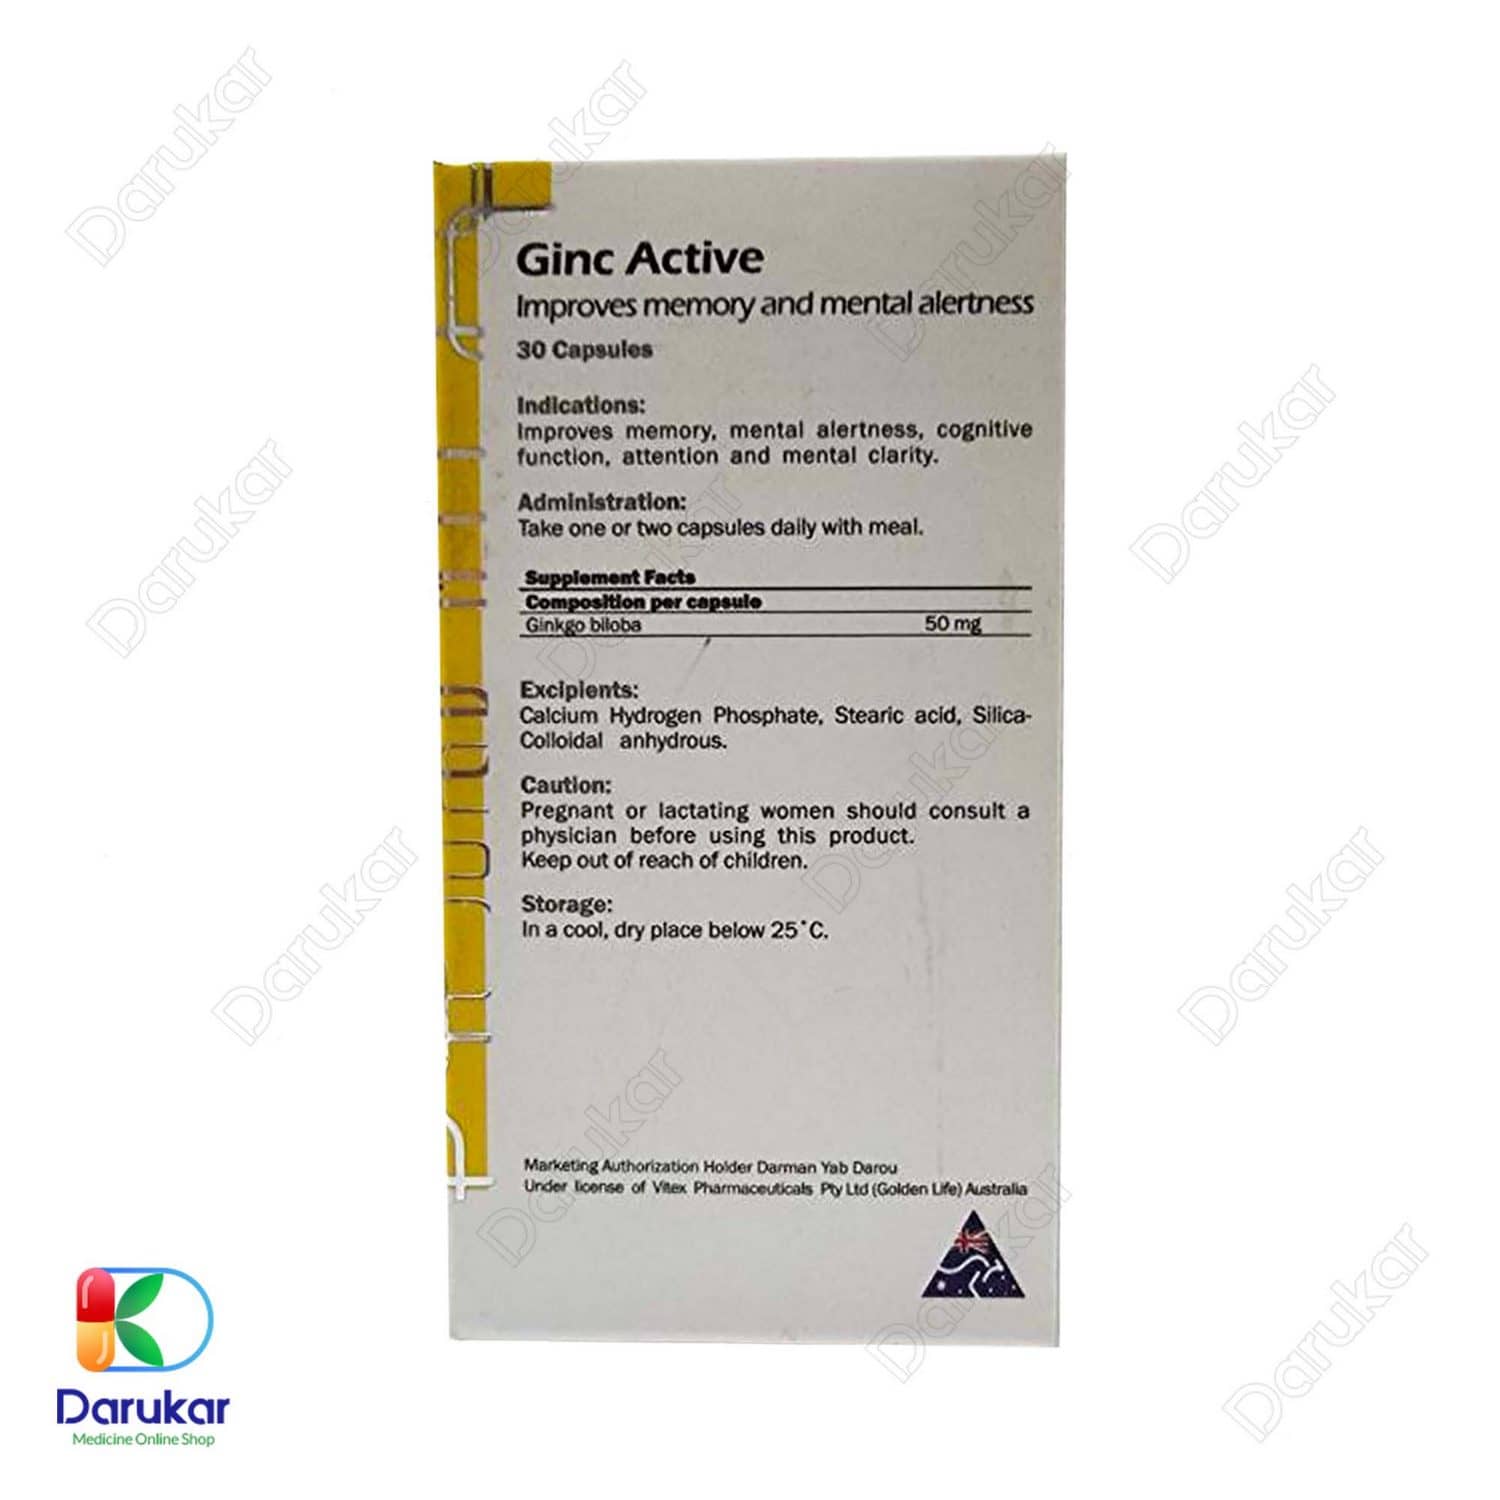 Golden Life Ginc Active 30 Capsules Image Gallery3